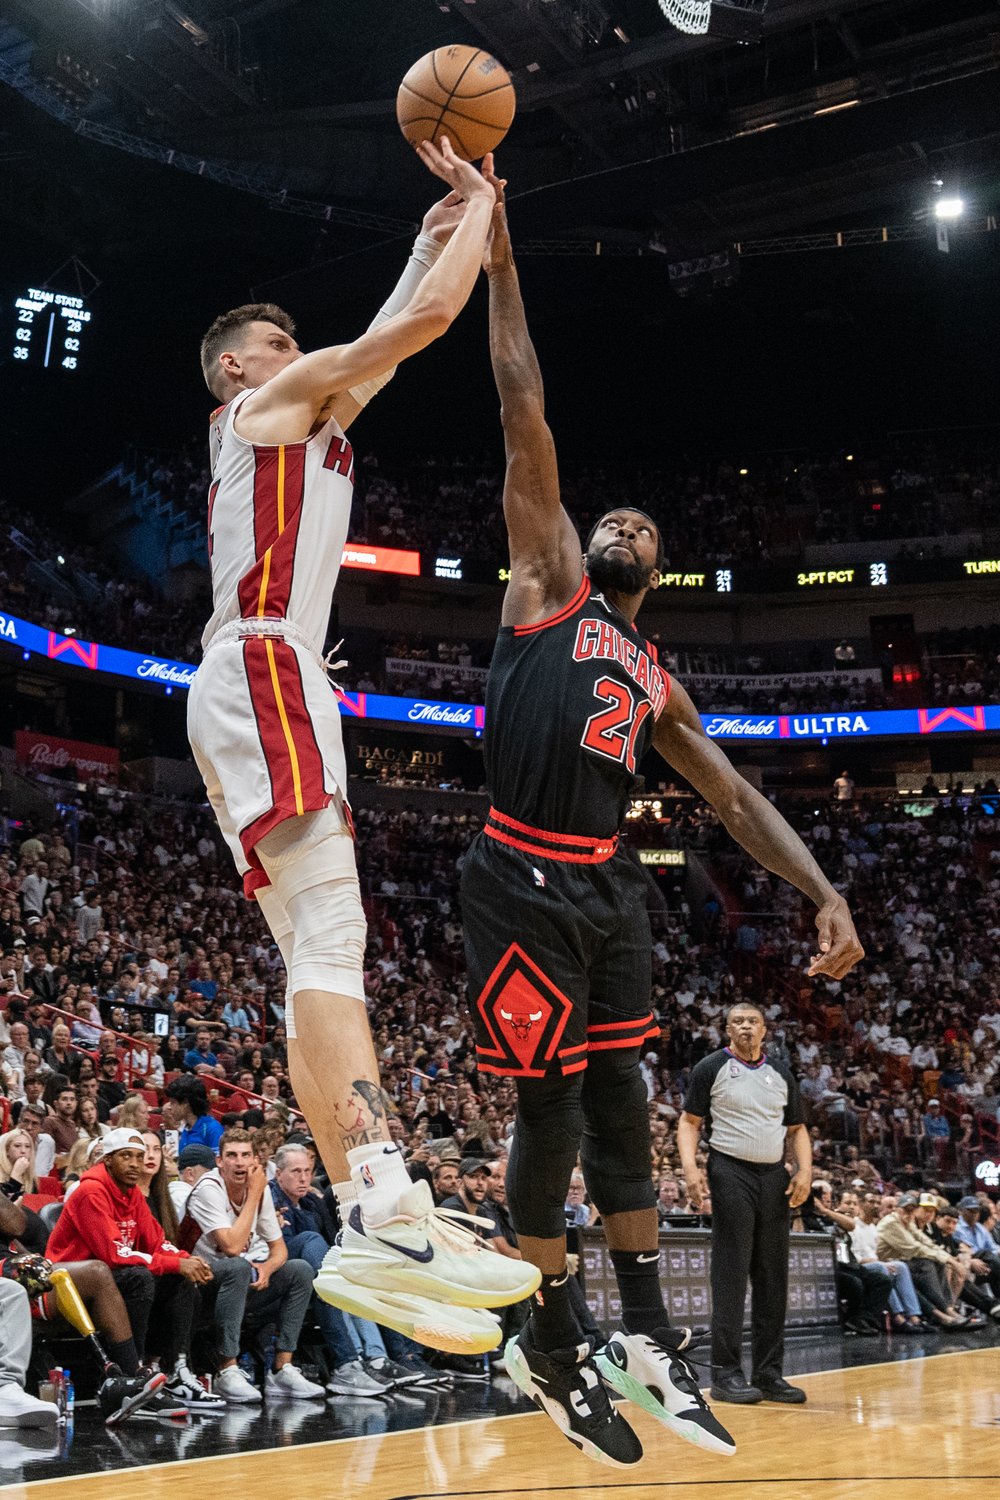  MIAMI, FL - APRIL 14: Tyler Herro #14 of the Miami Heat attempts a three point shot while being defended by Patrick Beverley #21 of the Chicago Bulls at Kaseya Center on April 14, 2023 in Miami, Florida. 